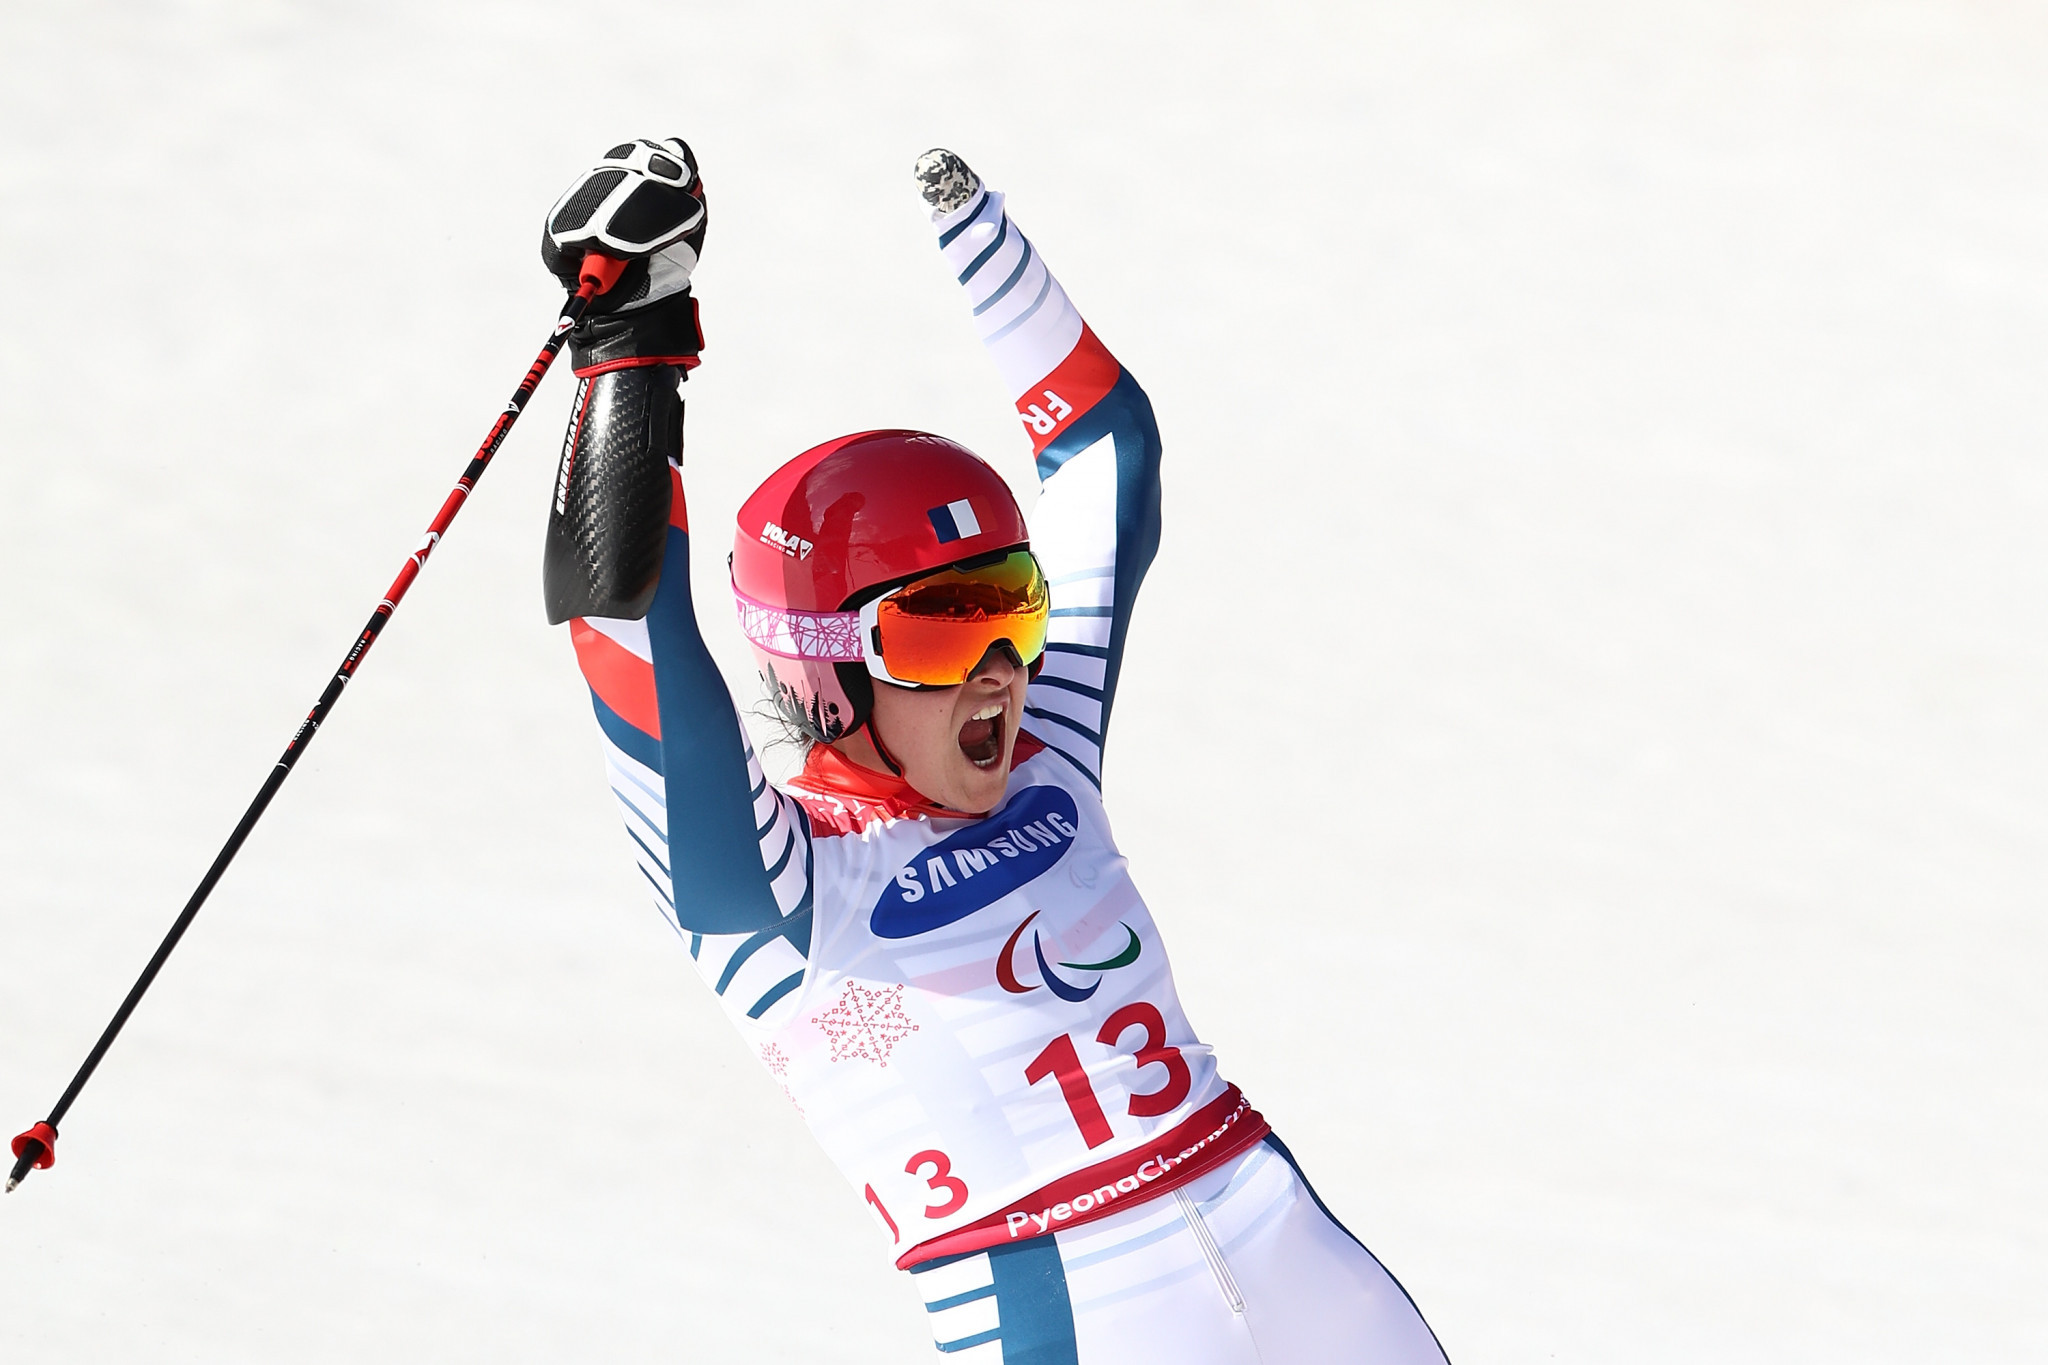 Marie Bochet continued her fine form at the World Para Alpine Skiing World Cup in Veysonnaz ©Getty Images